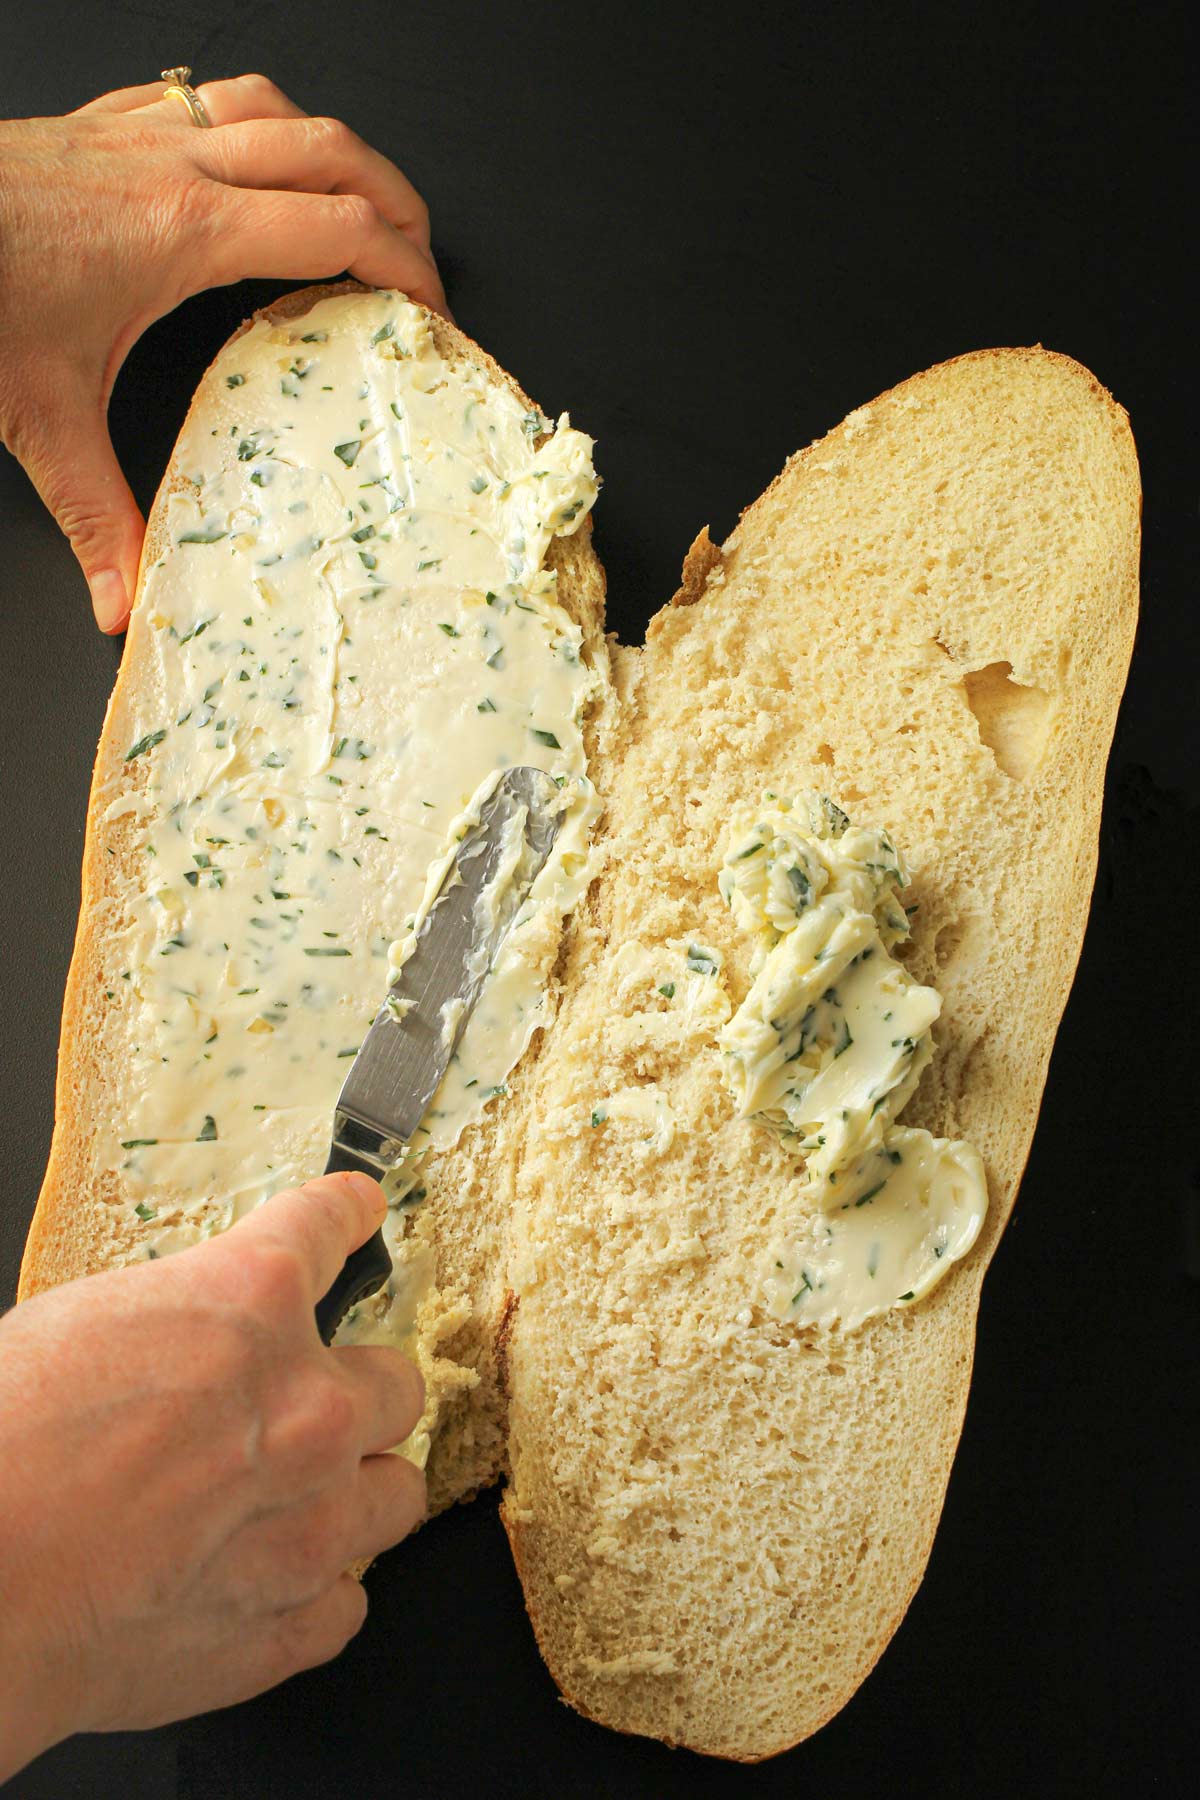 spreading the garlic butter evenly over the cut-sides of the bread.